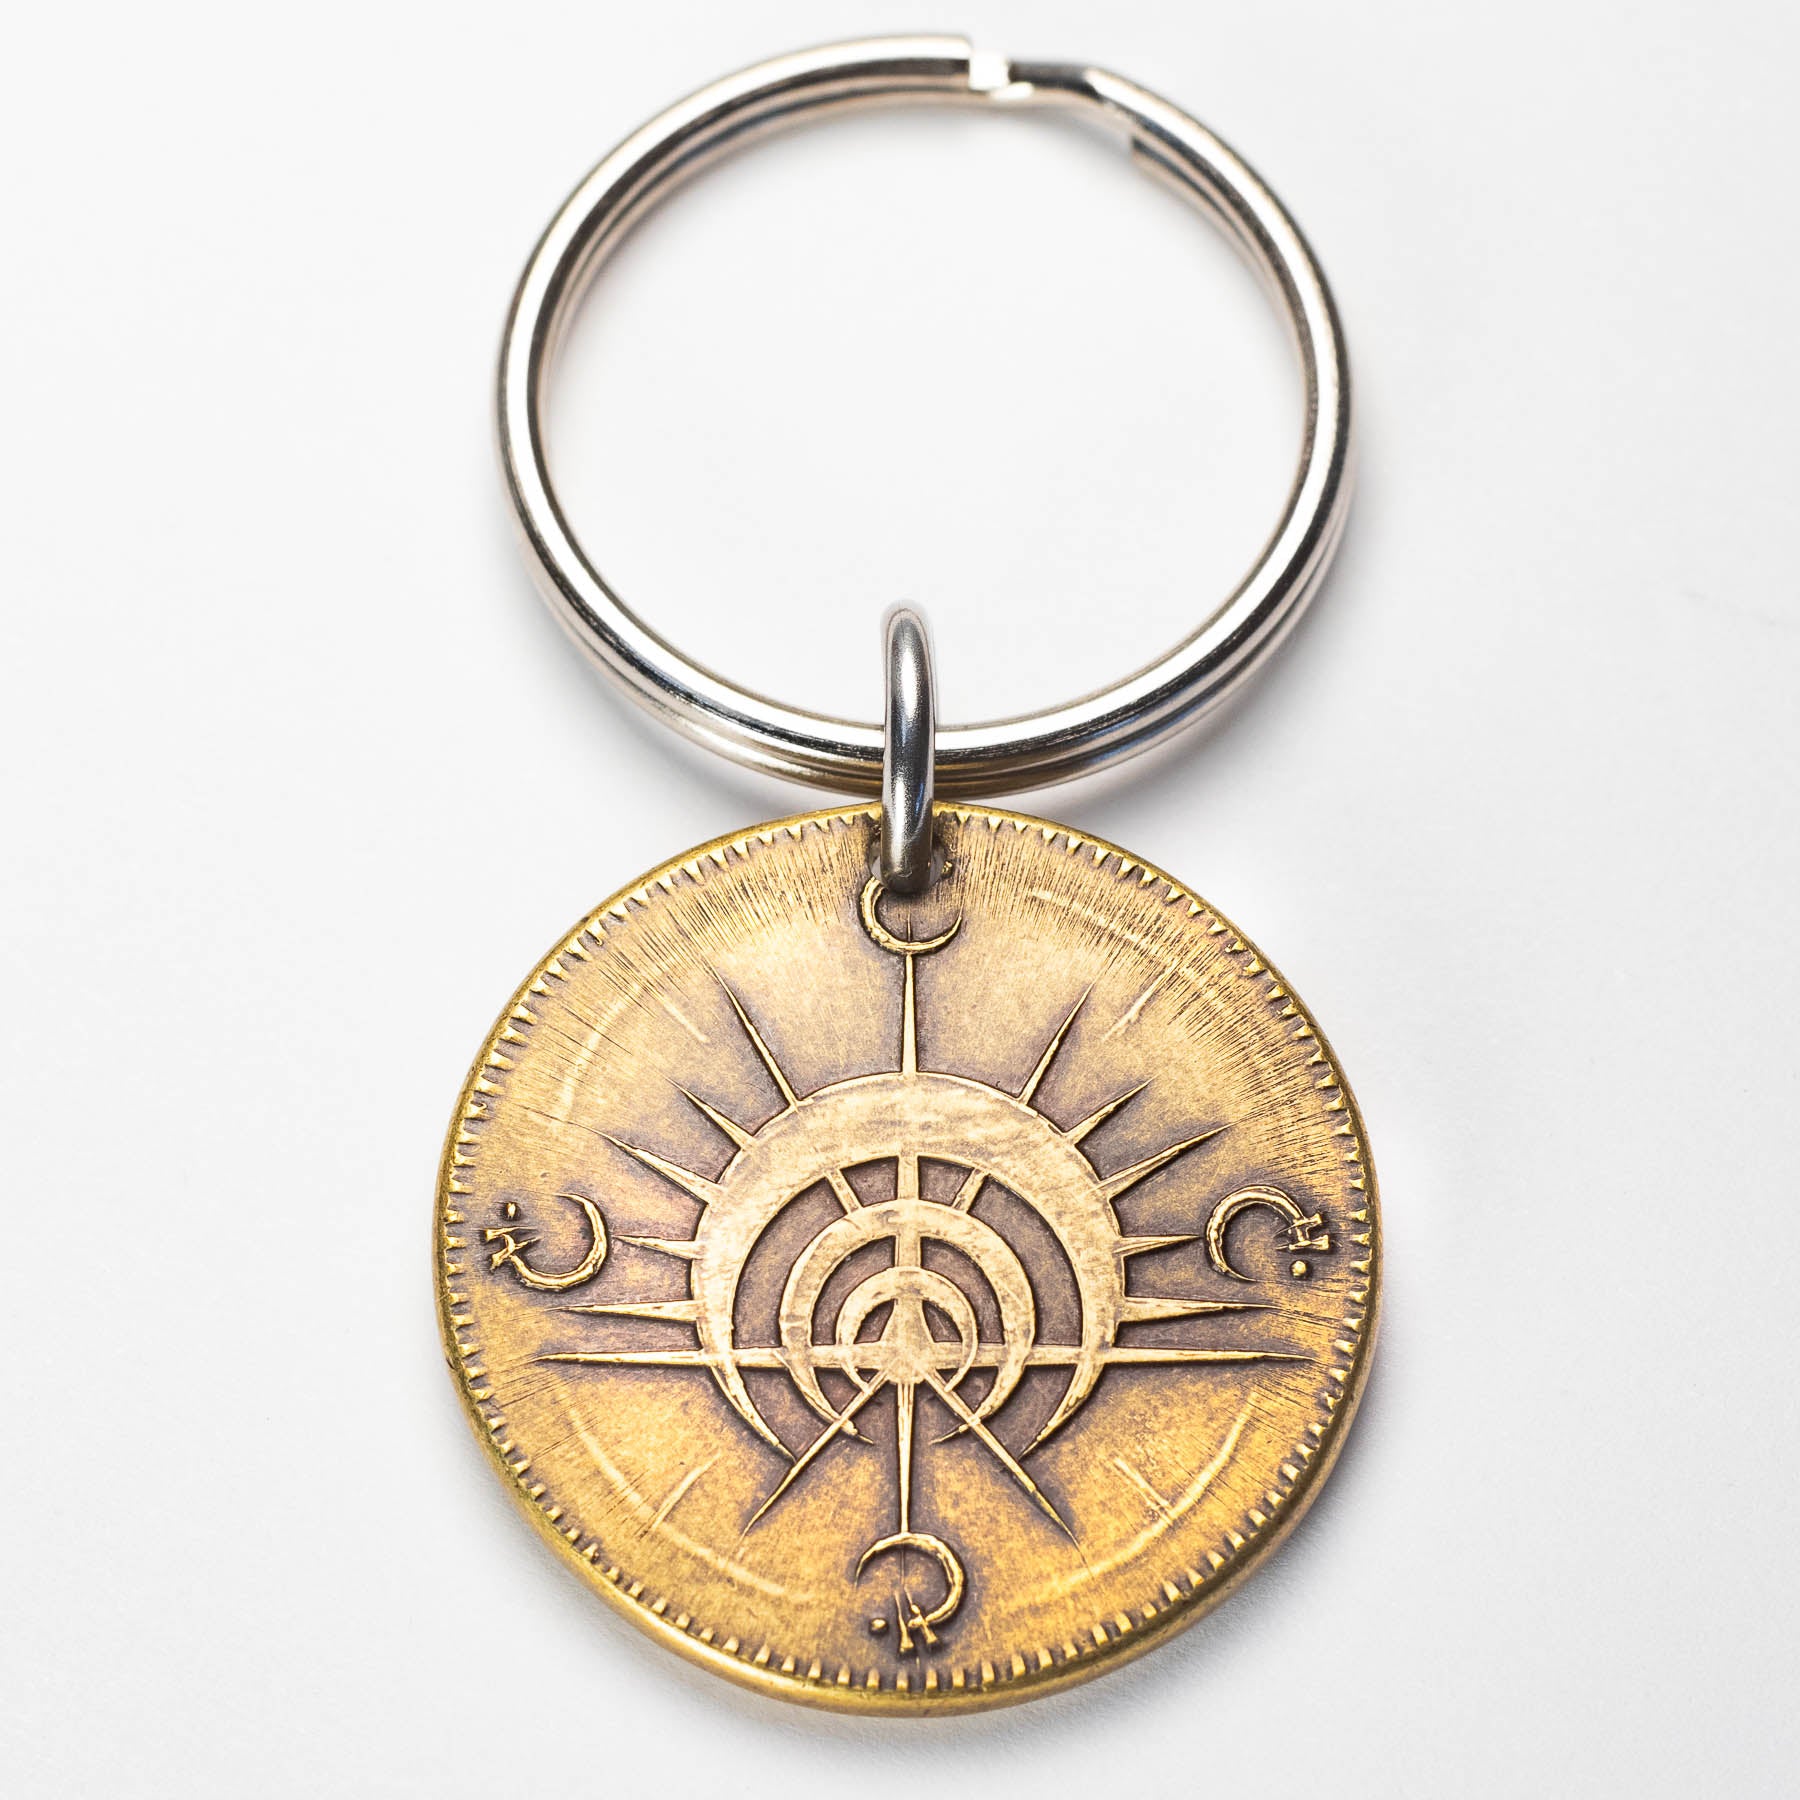 Mistborn Final Empire Brandon Sanderson Cosmere | Boxing Keychain by Shire Post Mint